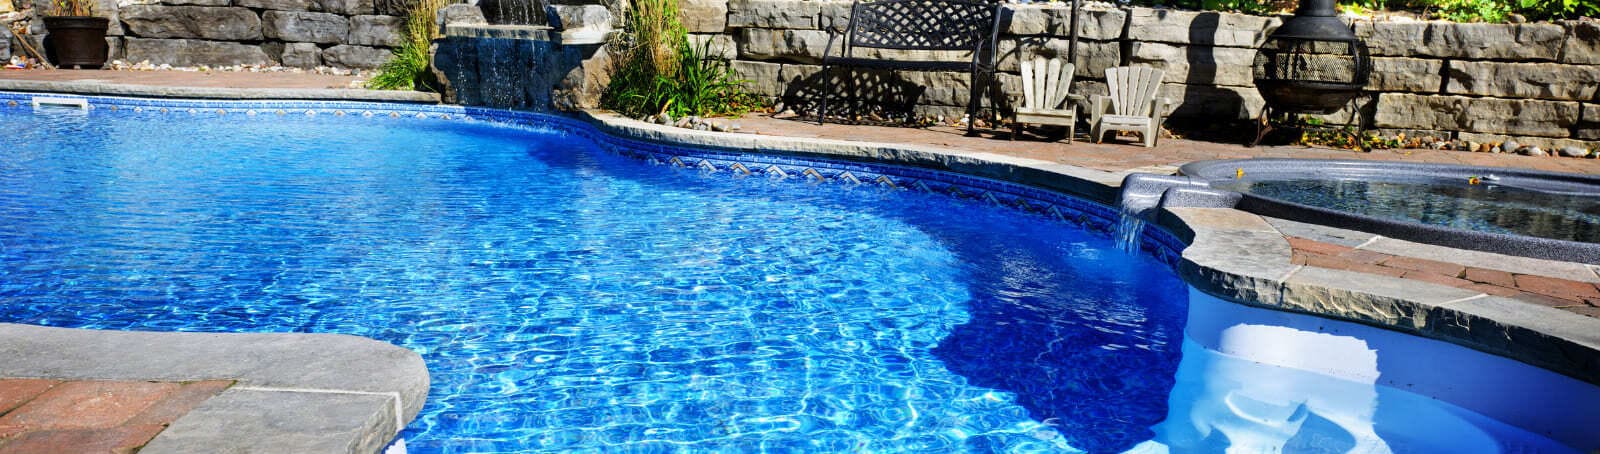 Dive into Financial Success: Managing Your Swimming Pool Business with Pimaccounting’s Legal and Accounting Expertise